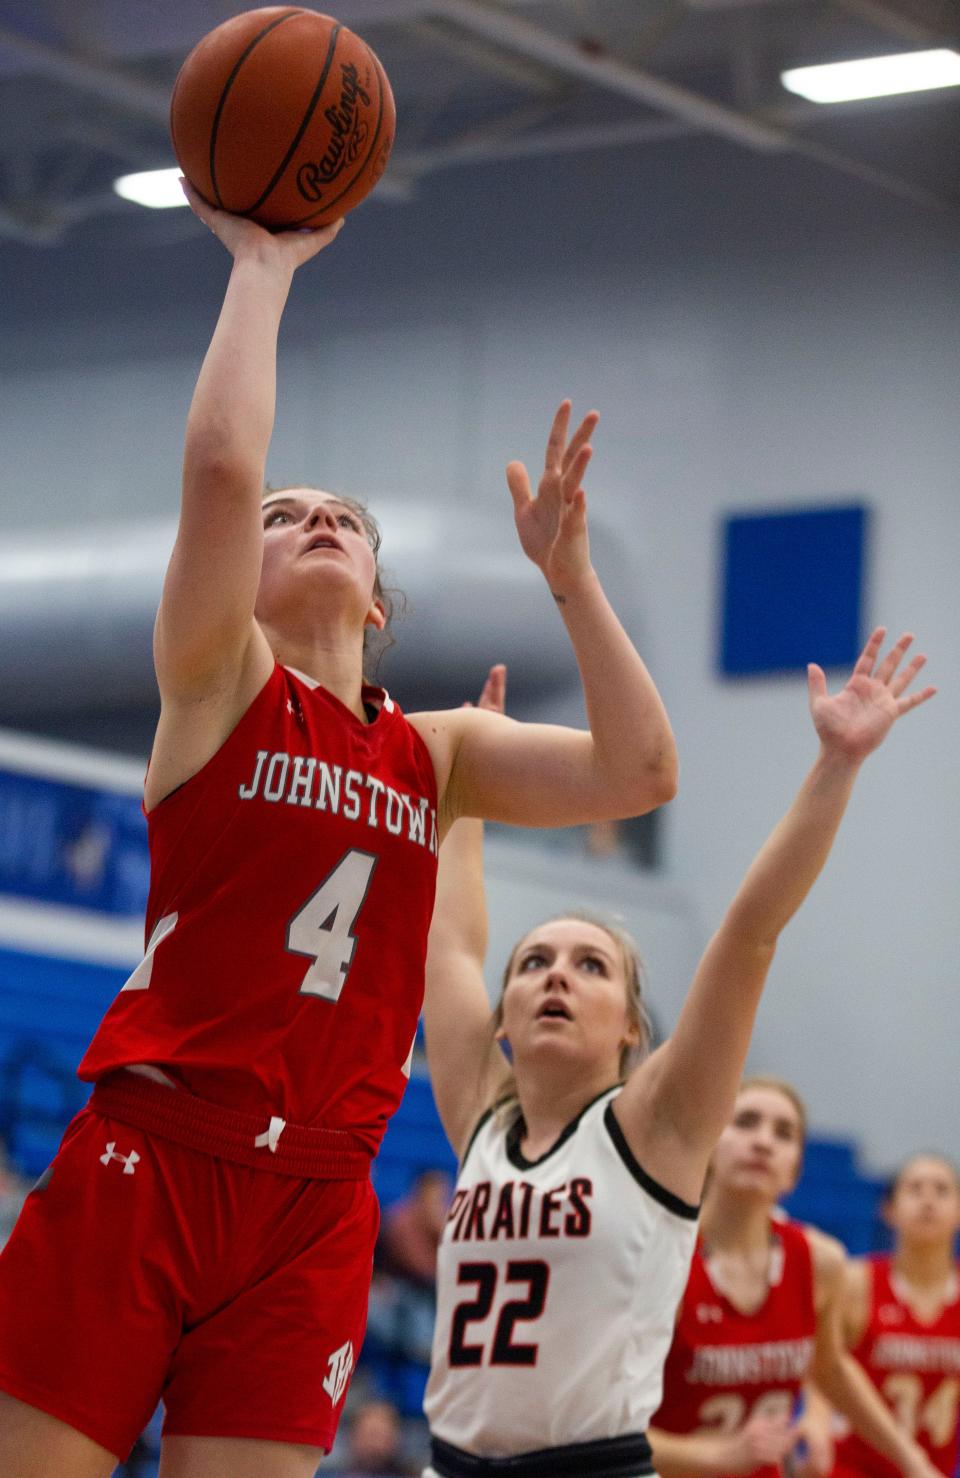 Johnstown junior Abigail Adkins led the Johnnies to the Division III district finals last season and is one of the top returning players in Licking County.